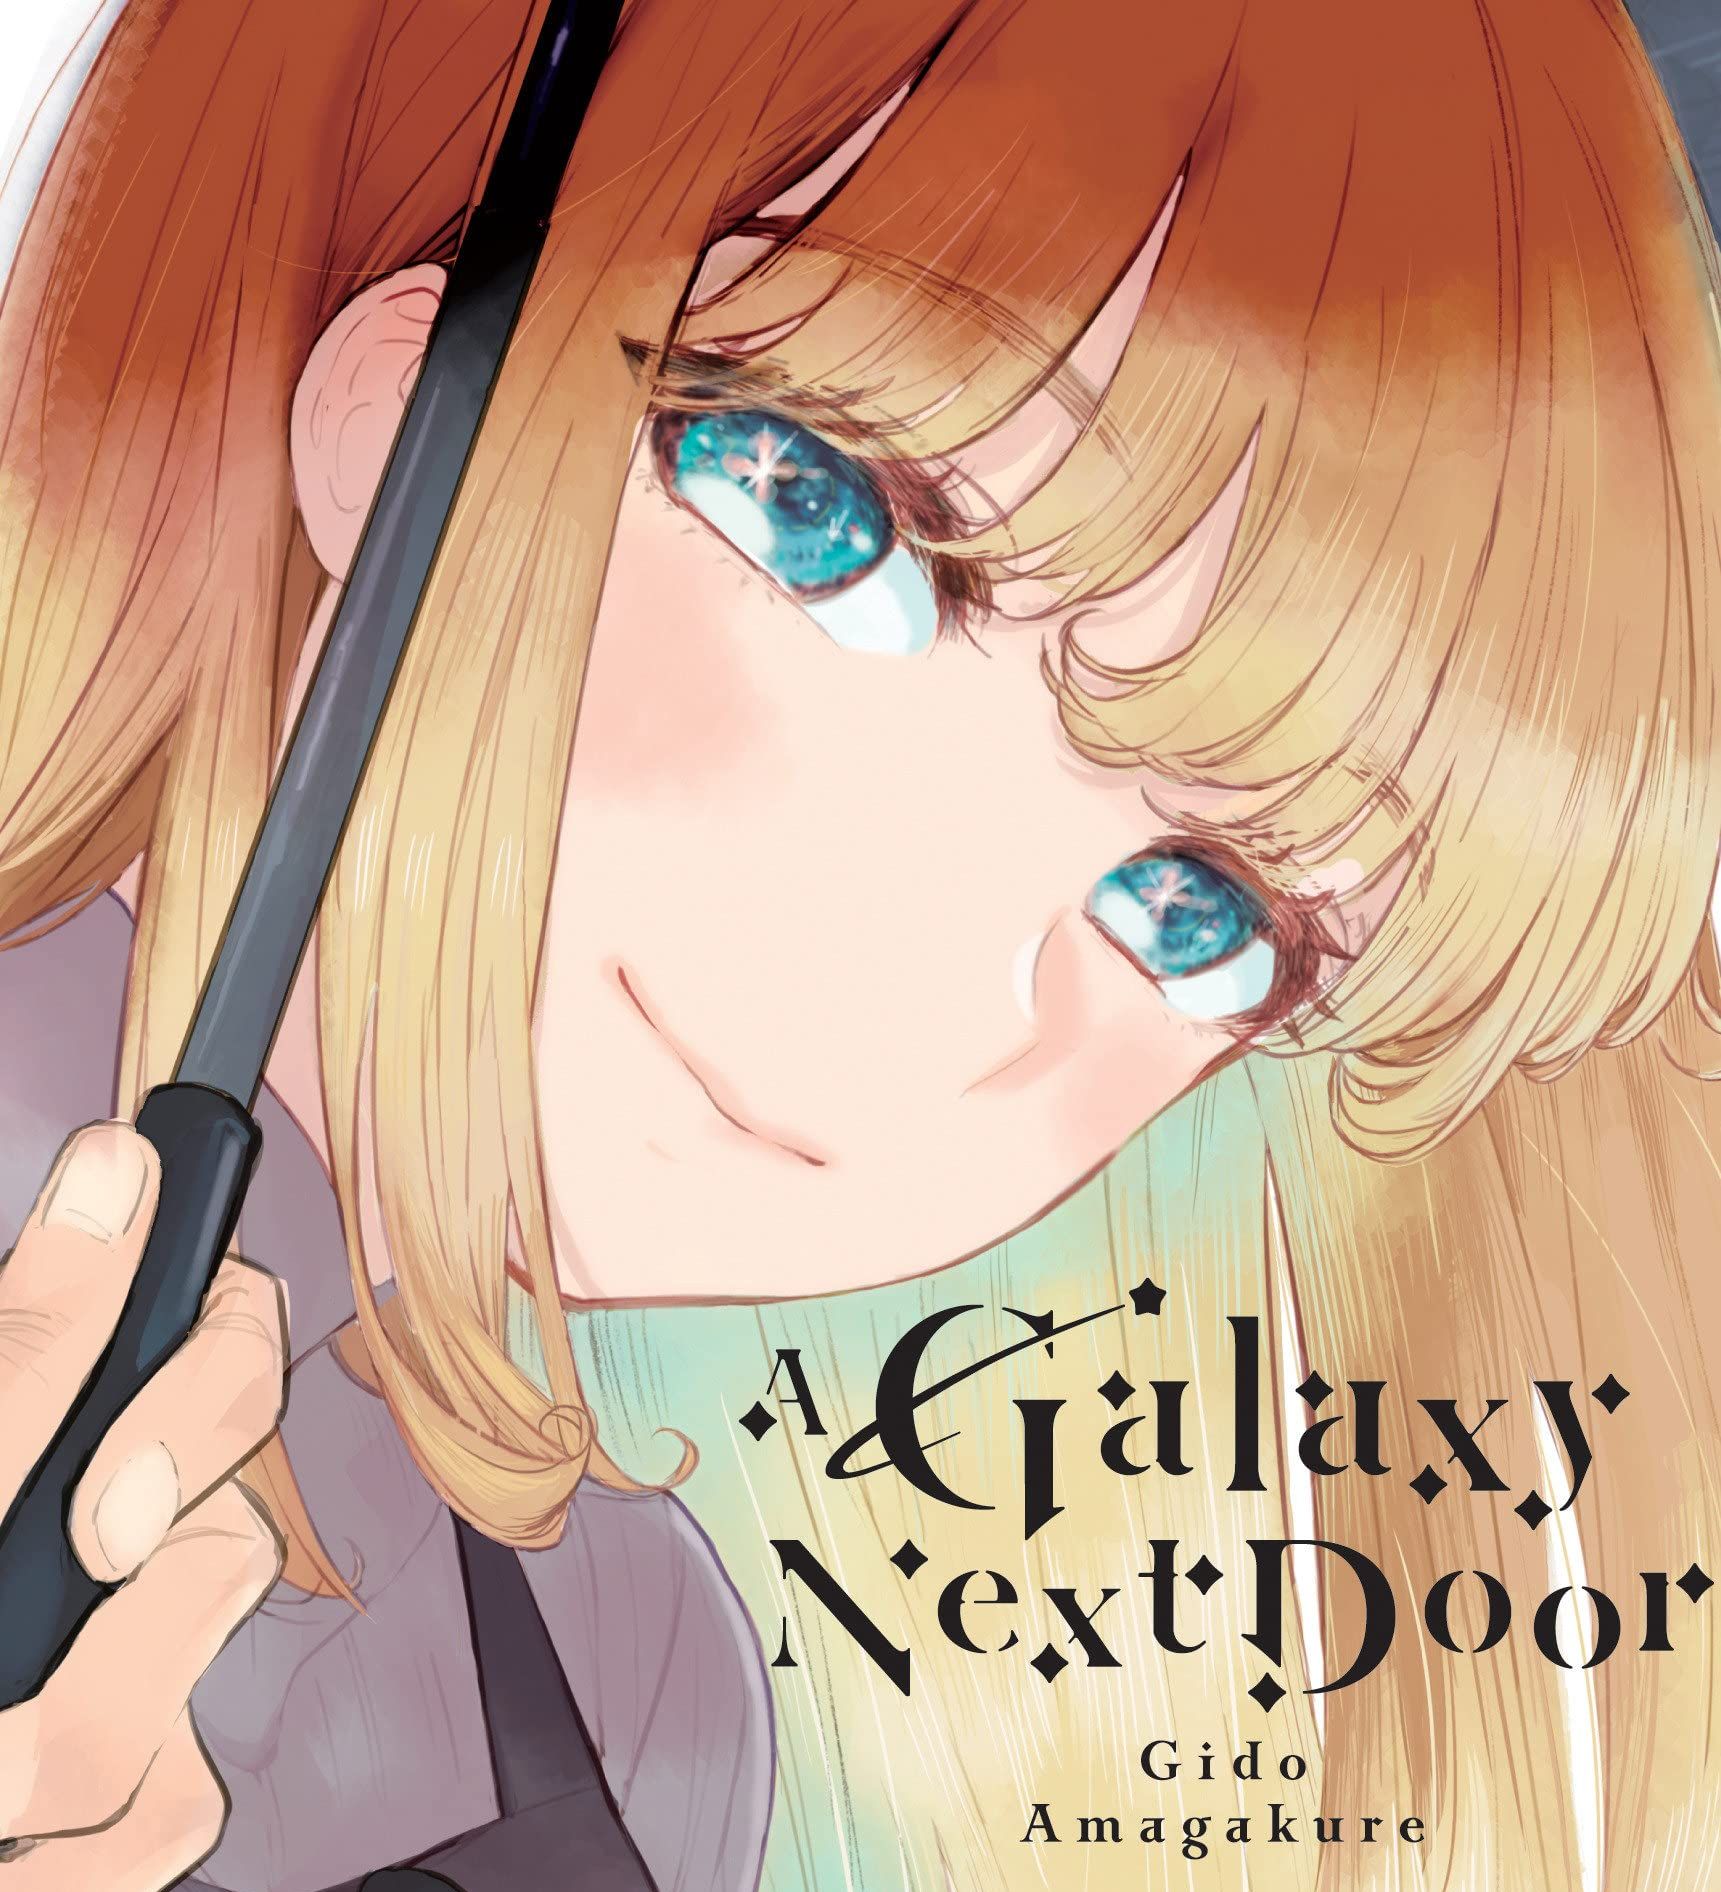 What will follow in the plot of the anime series -The Galaxy Next Door